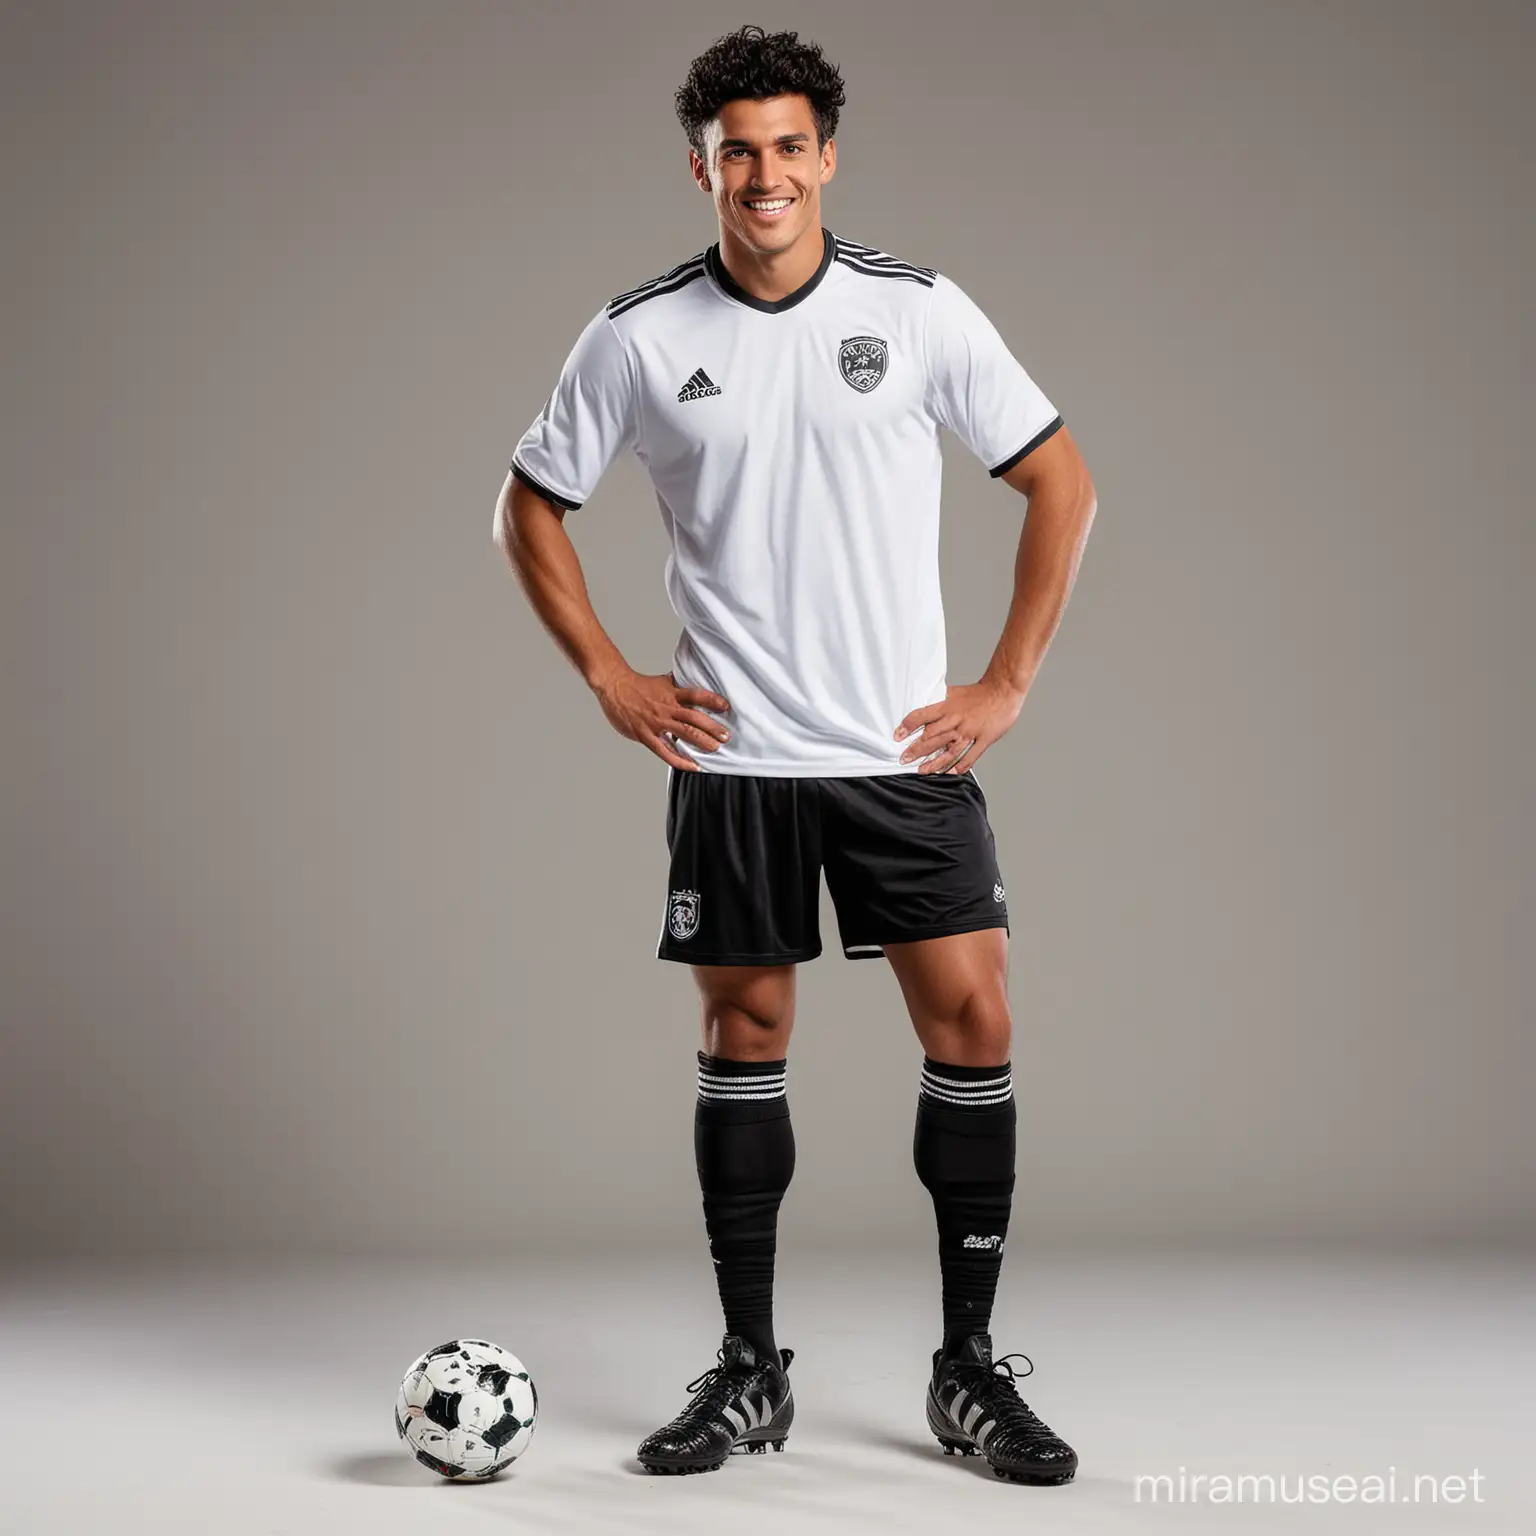 Smiling Male Soccer Player in Black Boots